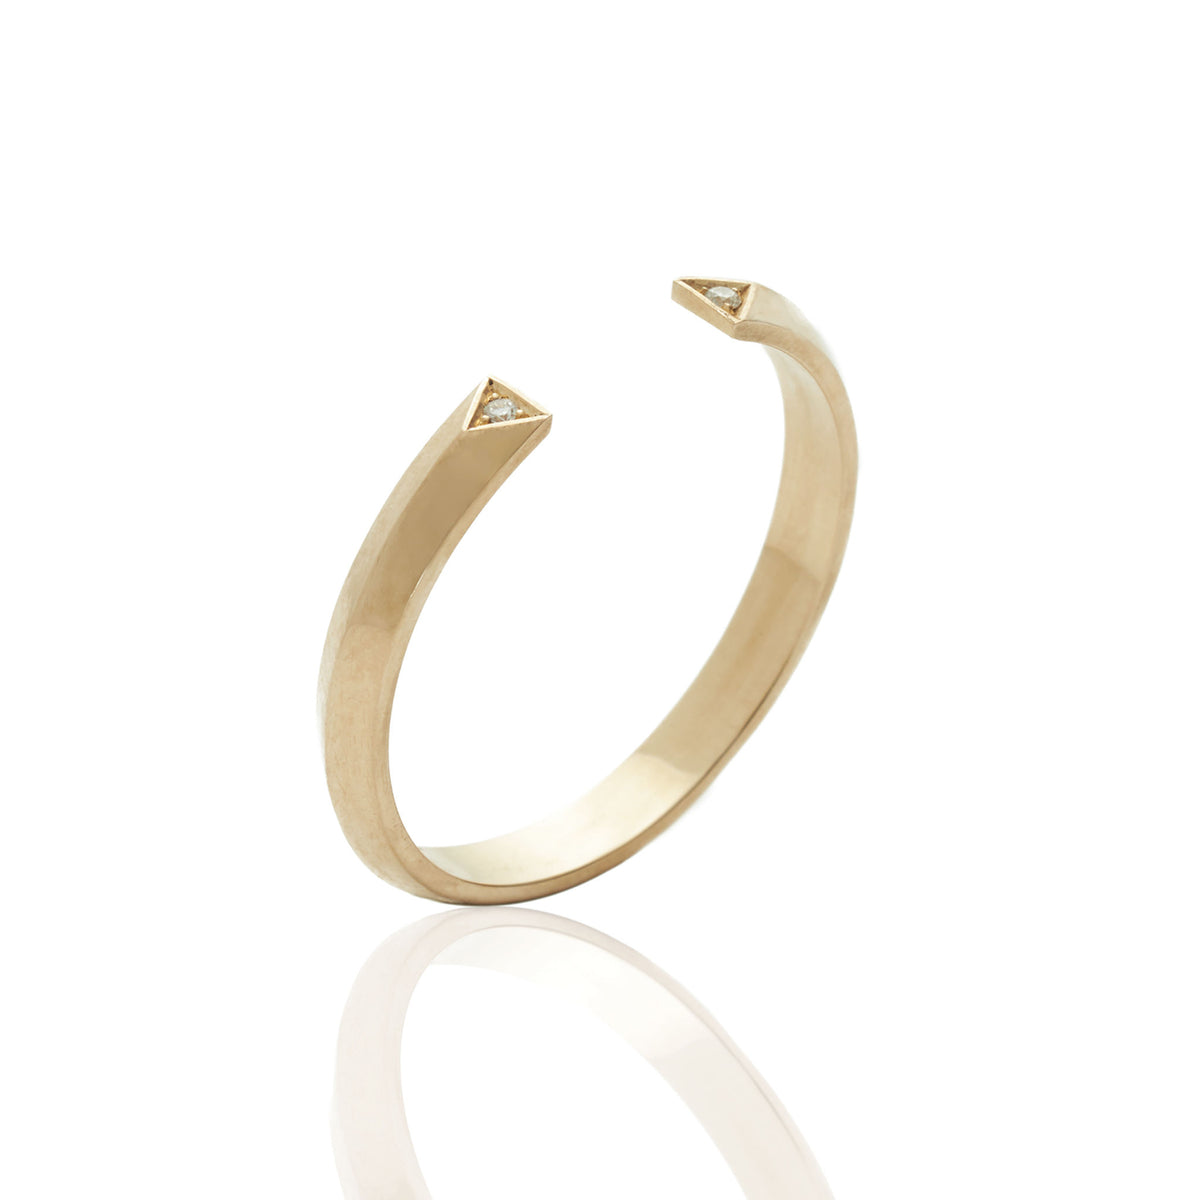 EMBRACE 9ct Gold & Diamond Ring - Boutee